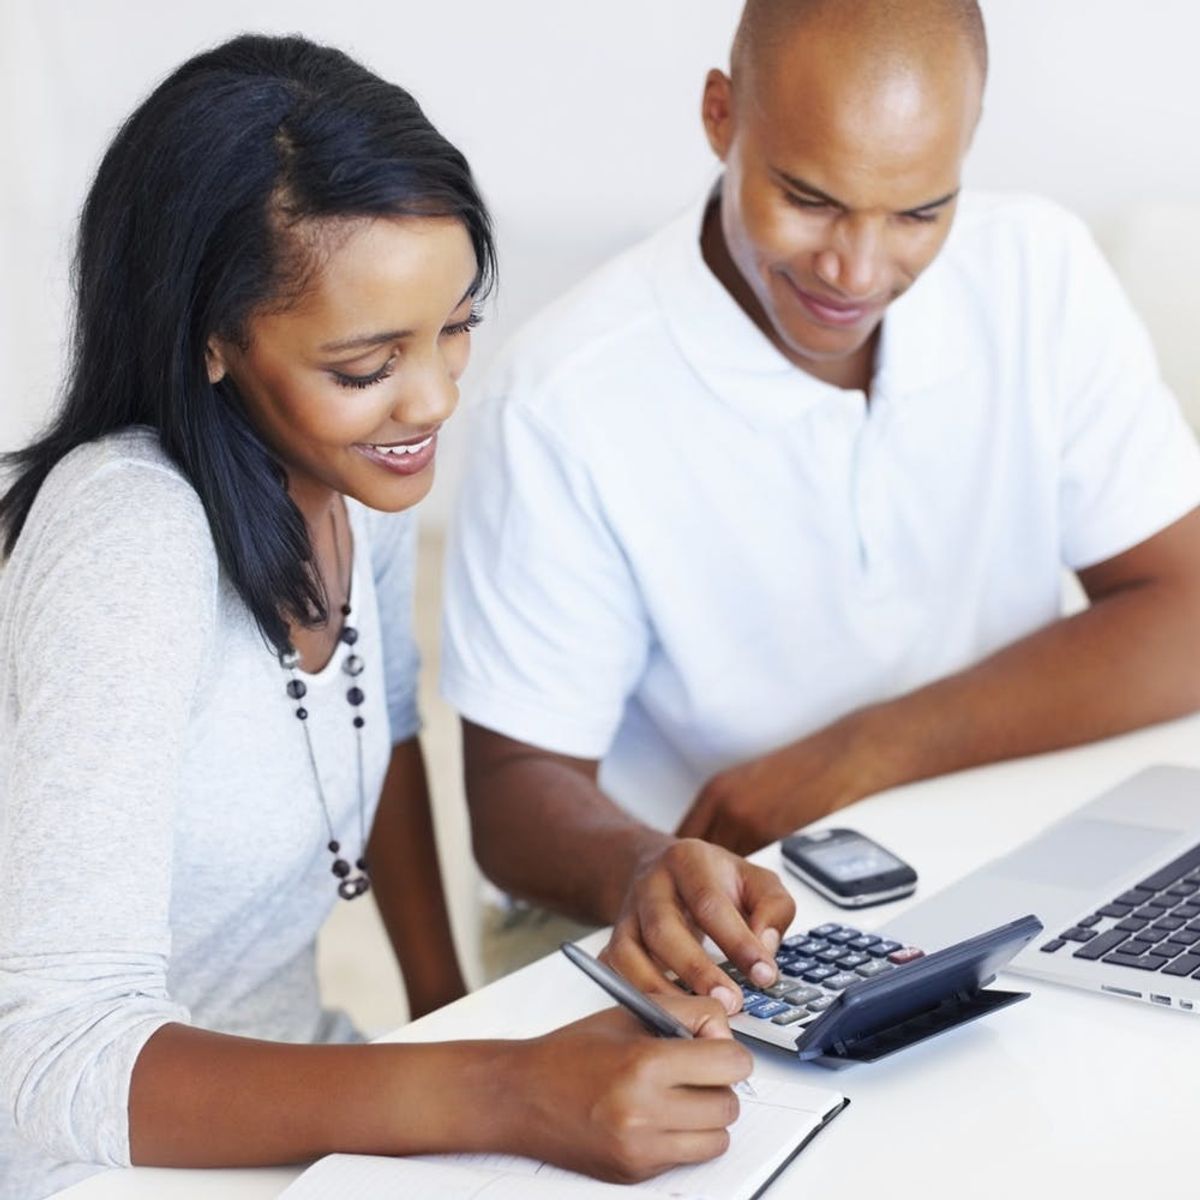 Read These 5 Tips Before Sharing Finances With Your S.O.